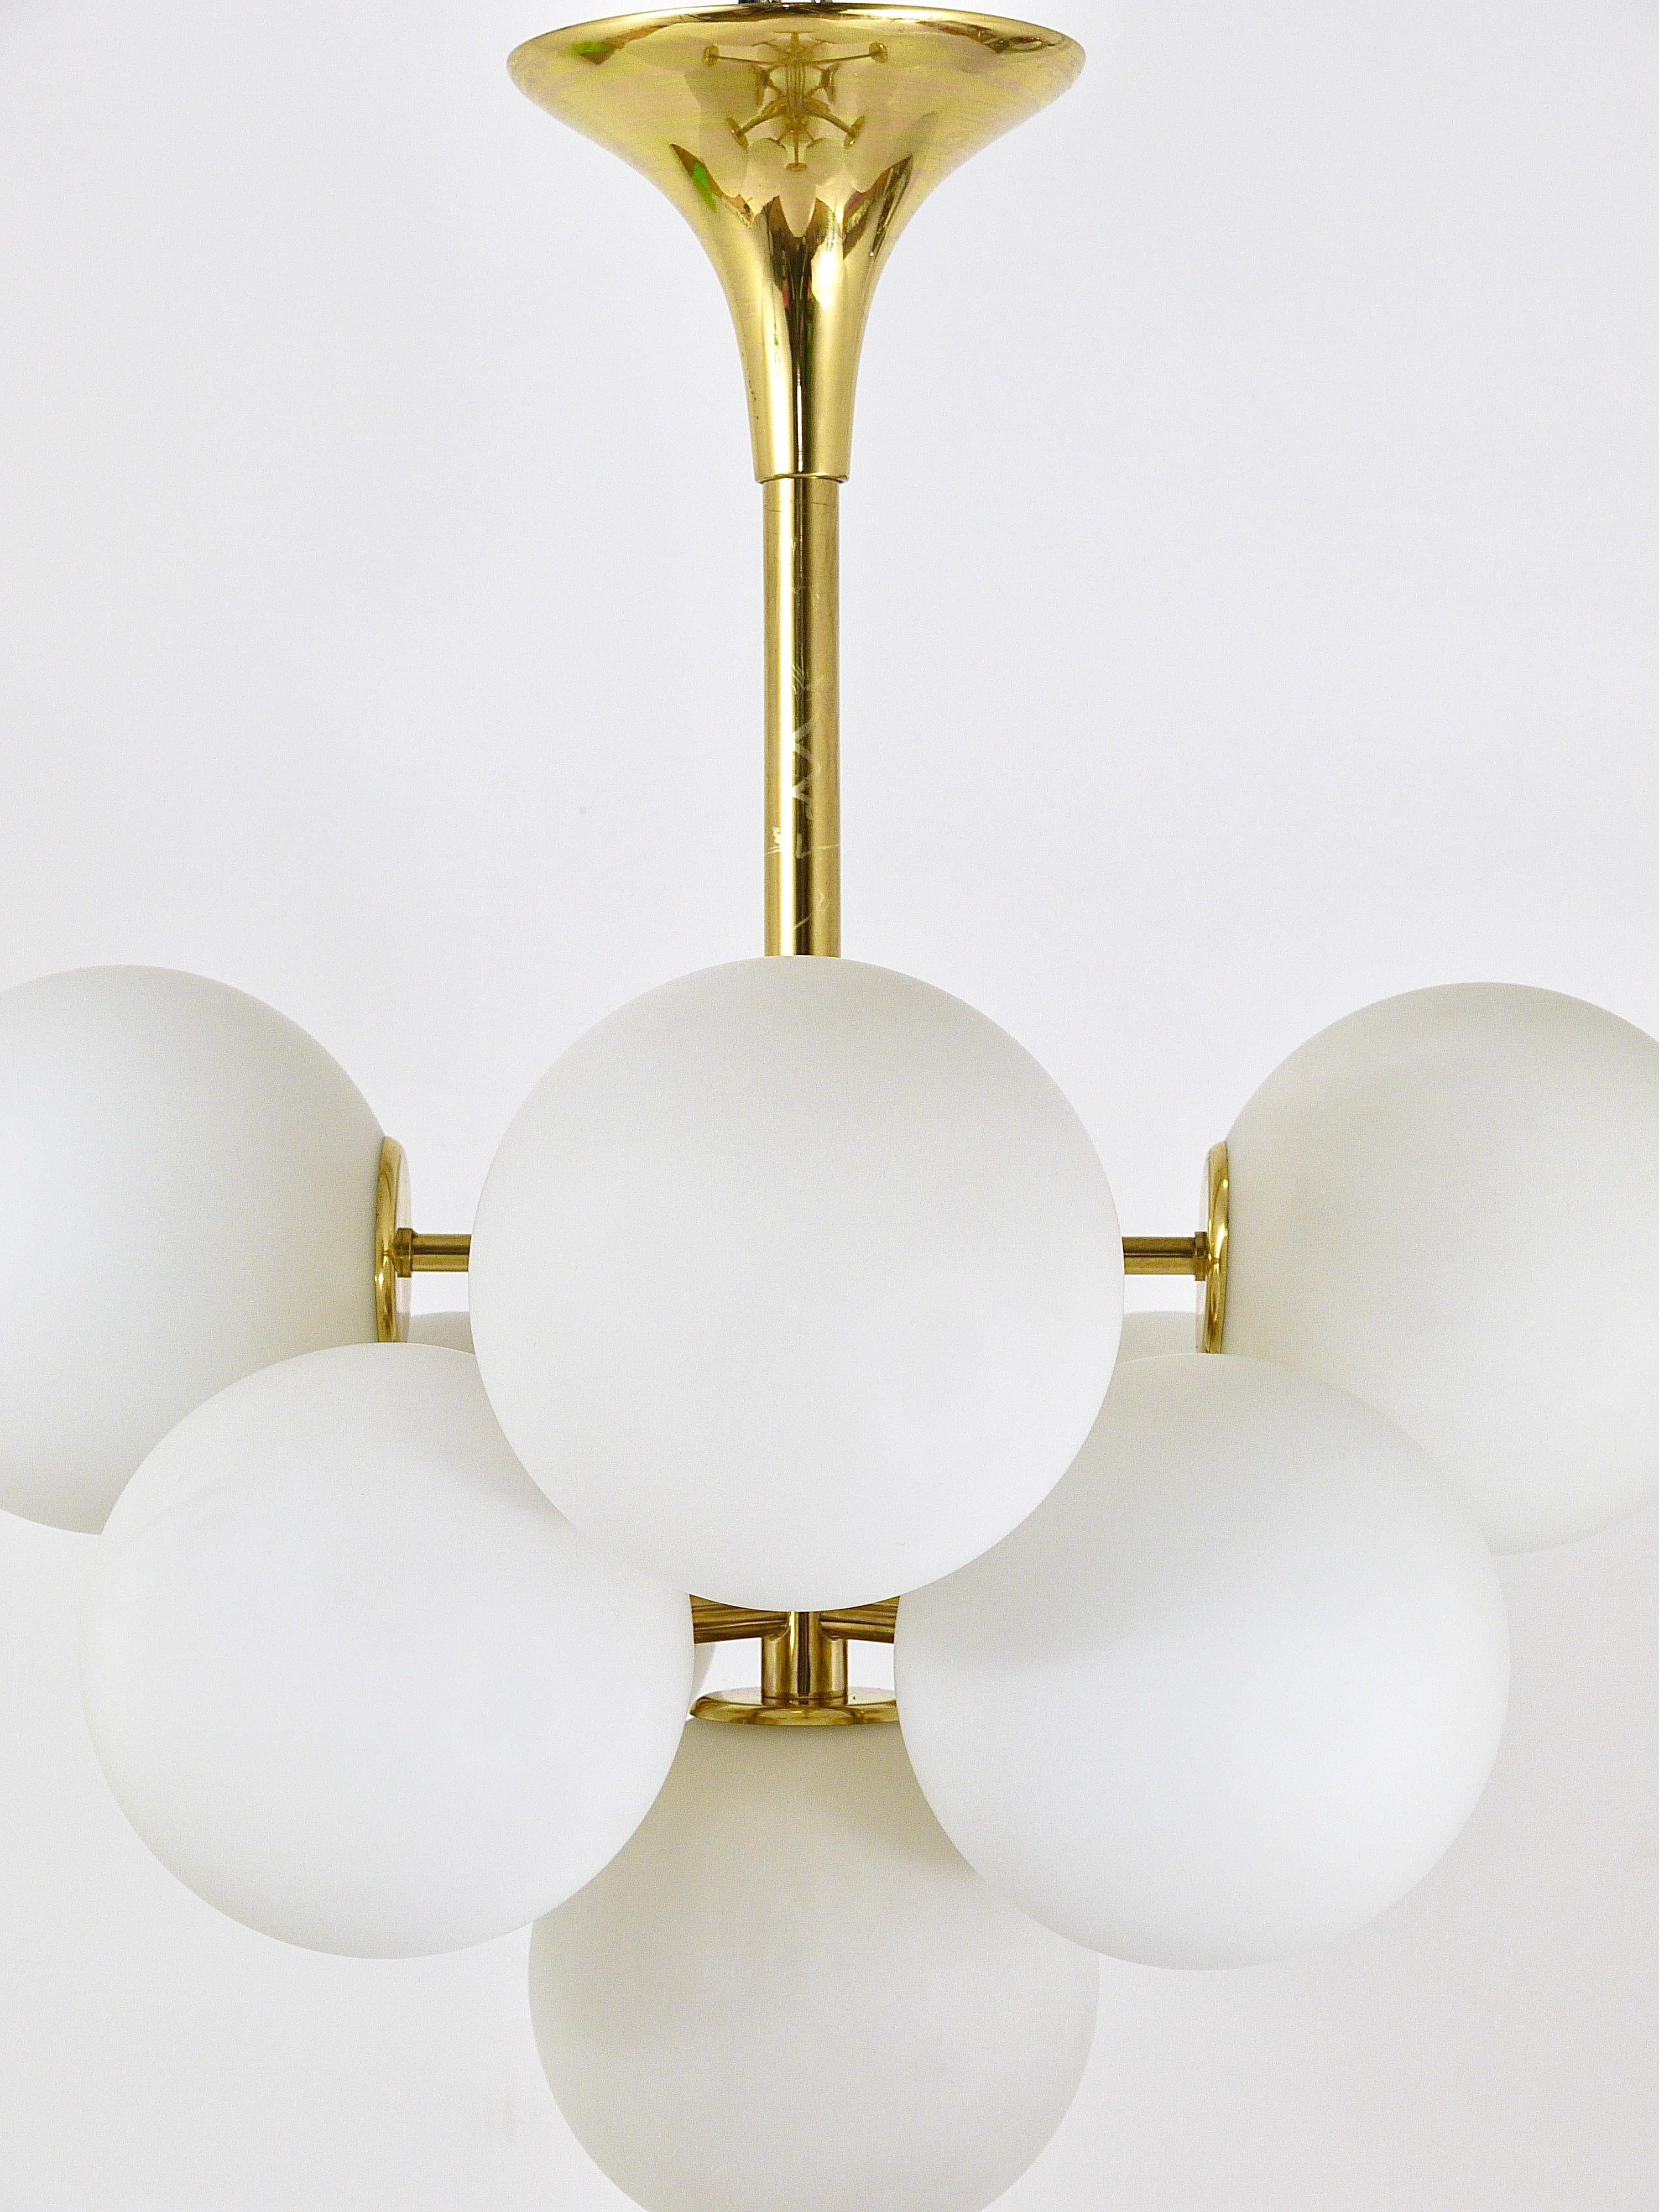 Frosted Atomic Brass Chandelier, White Glass Globes, in the style of E. R. Nele by Temde